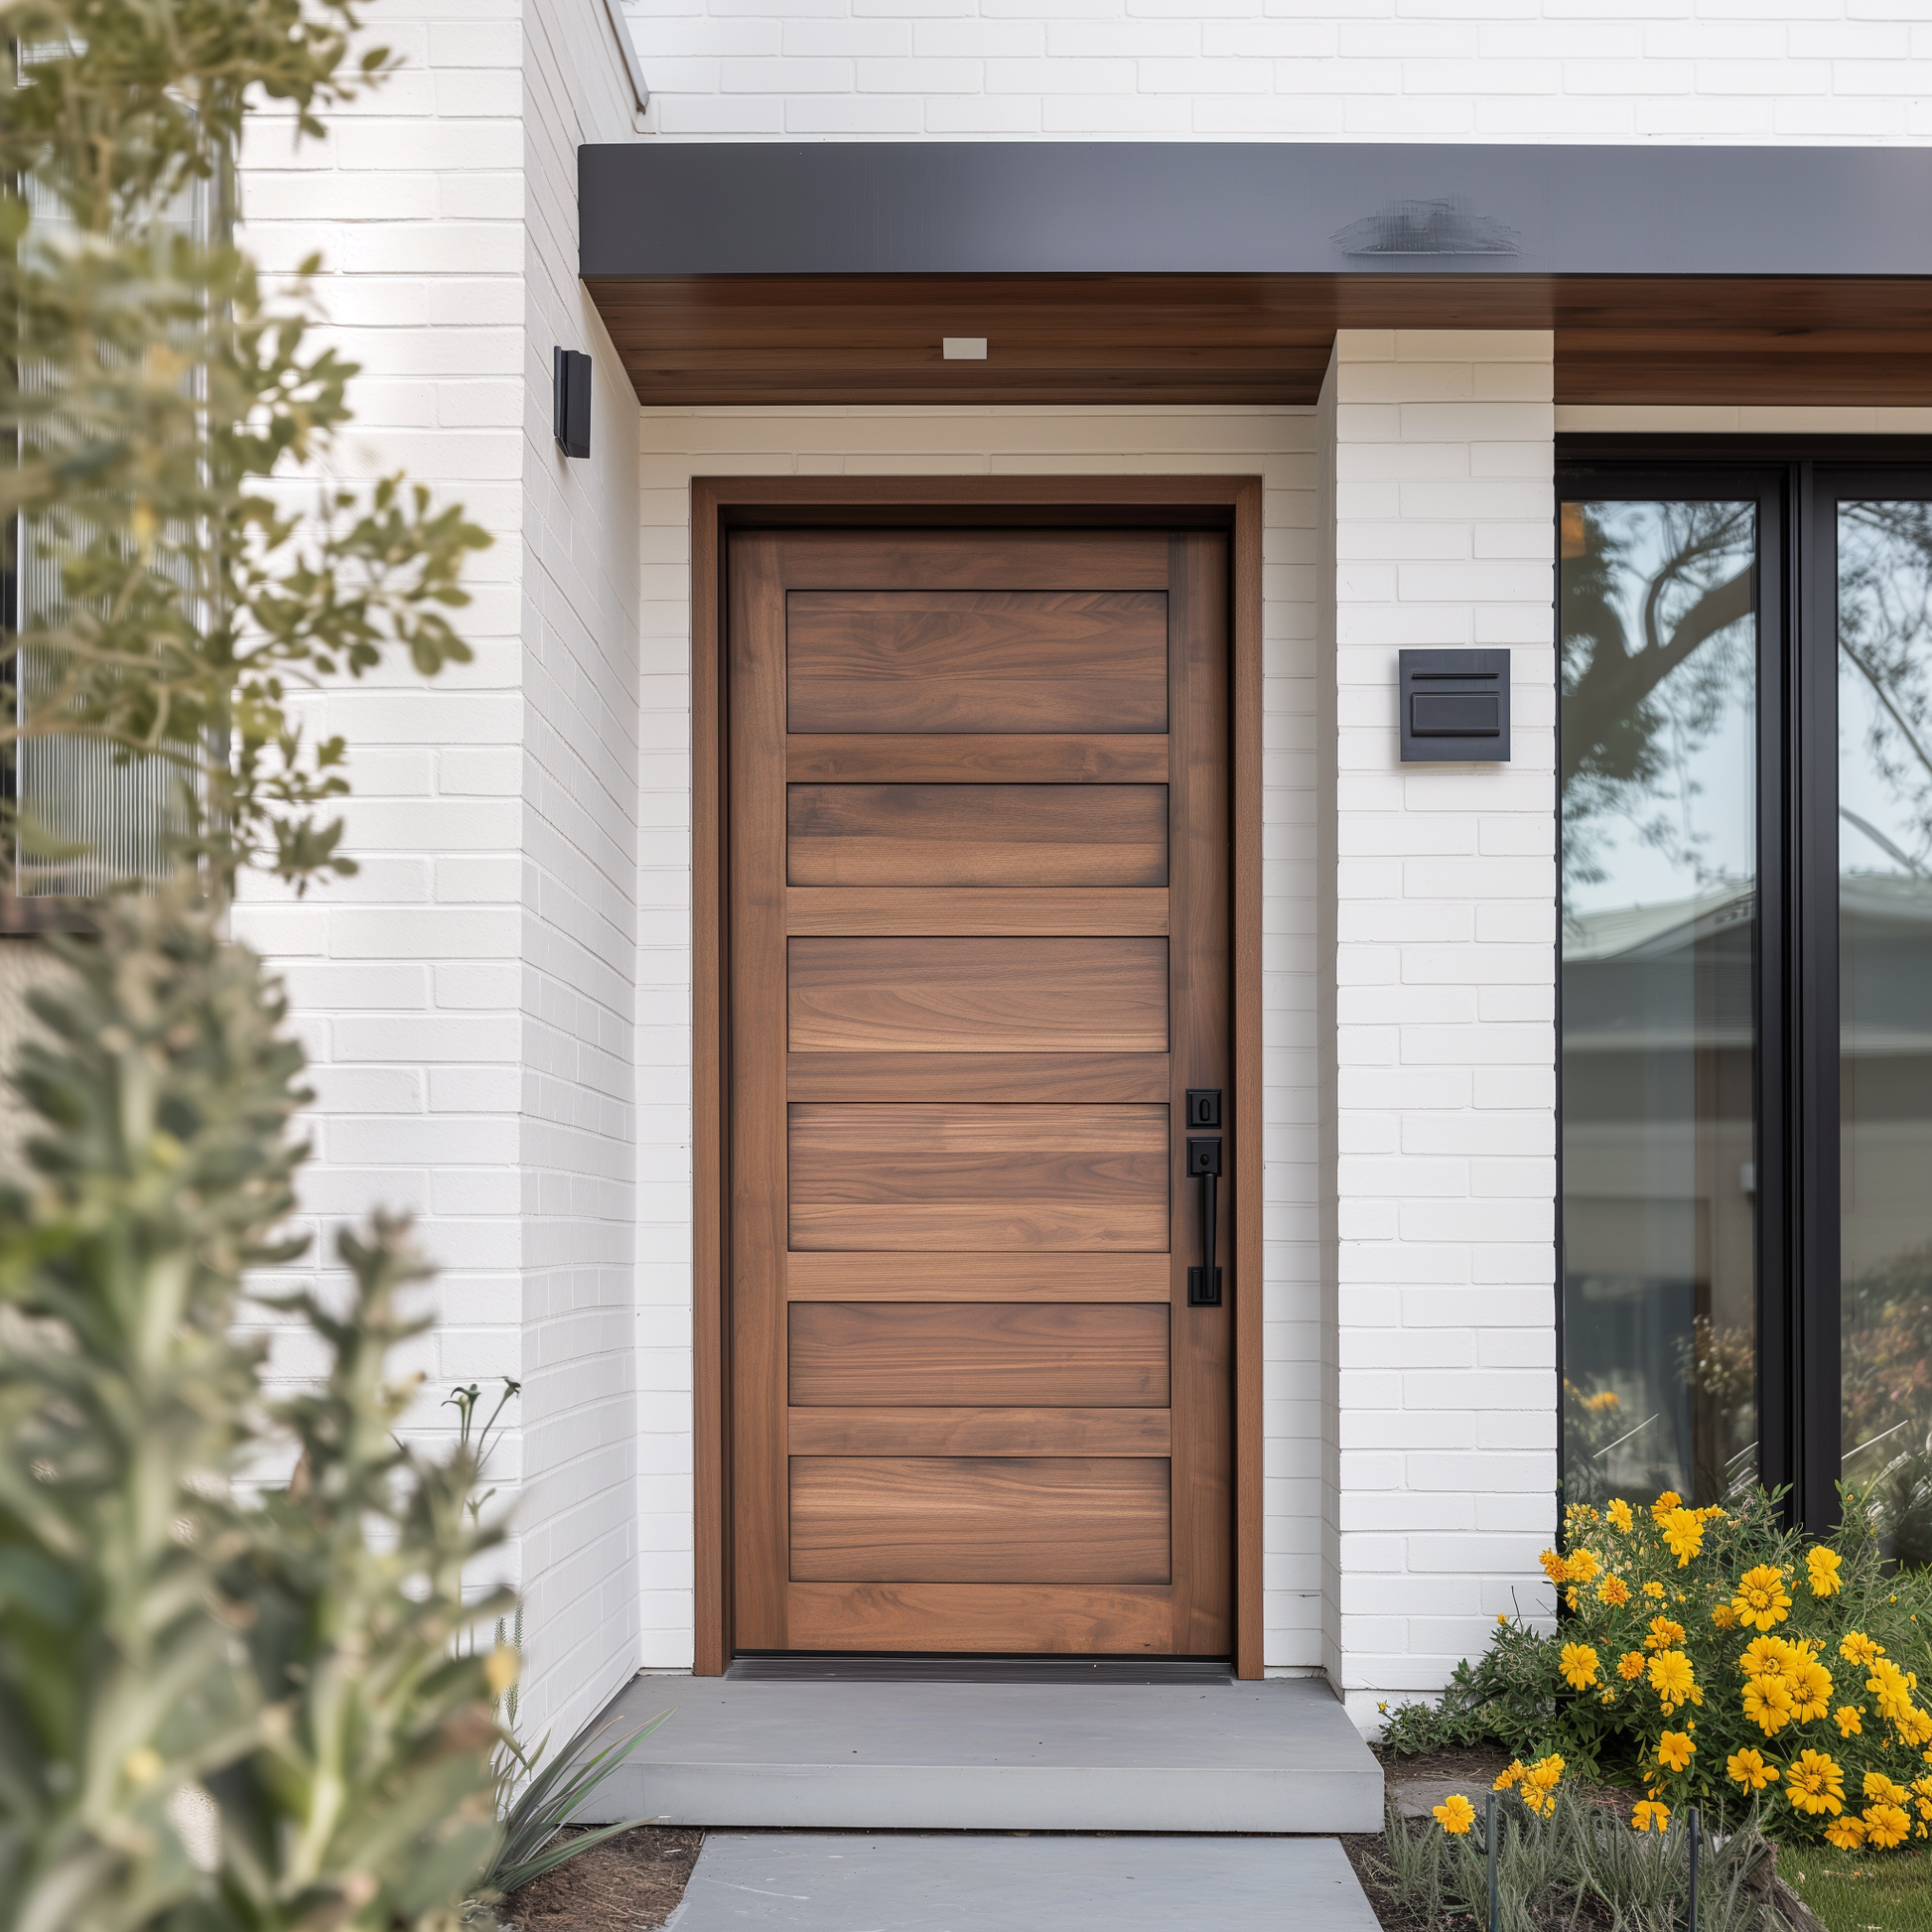 Caroline bespoke exterior solid walnut front exterior door fully custom and customizable made in usa american handcrafted, pictured on a white brick modern home.